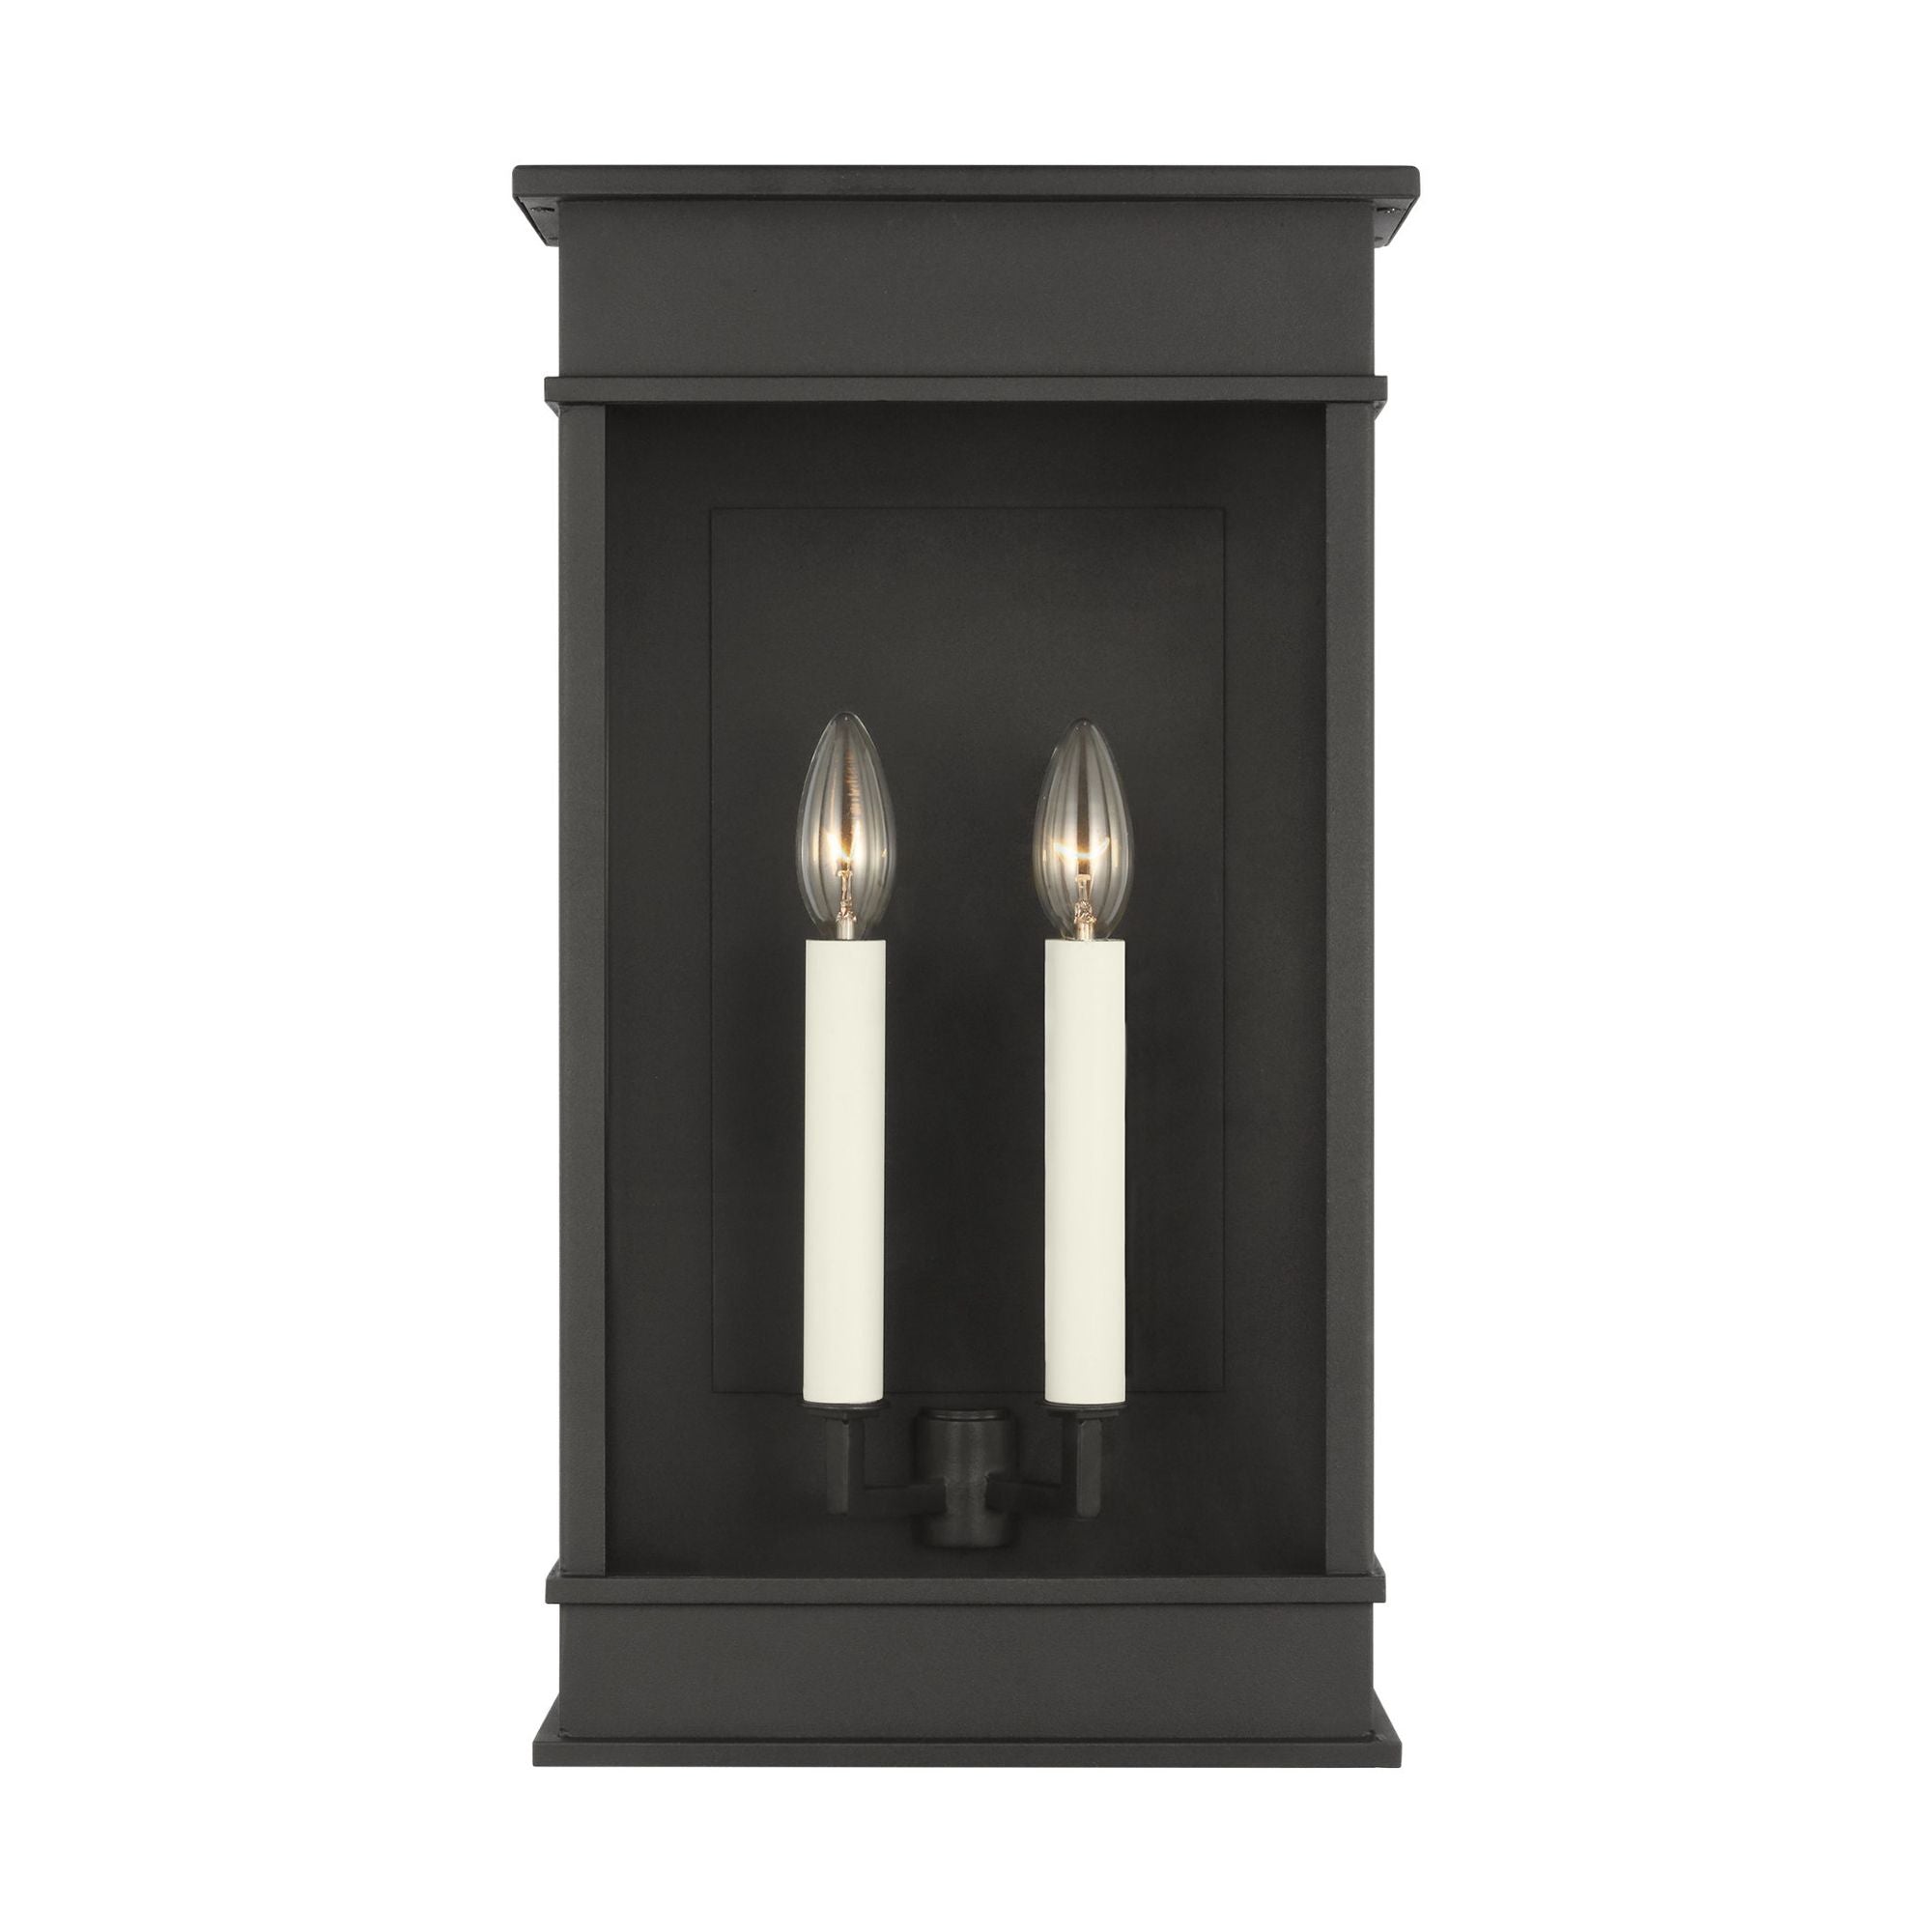 Chapman & Myers Cupertino Extra Large Wall Lantern in Textured Black